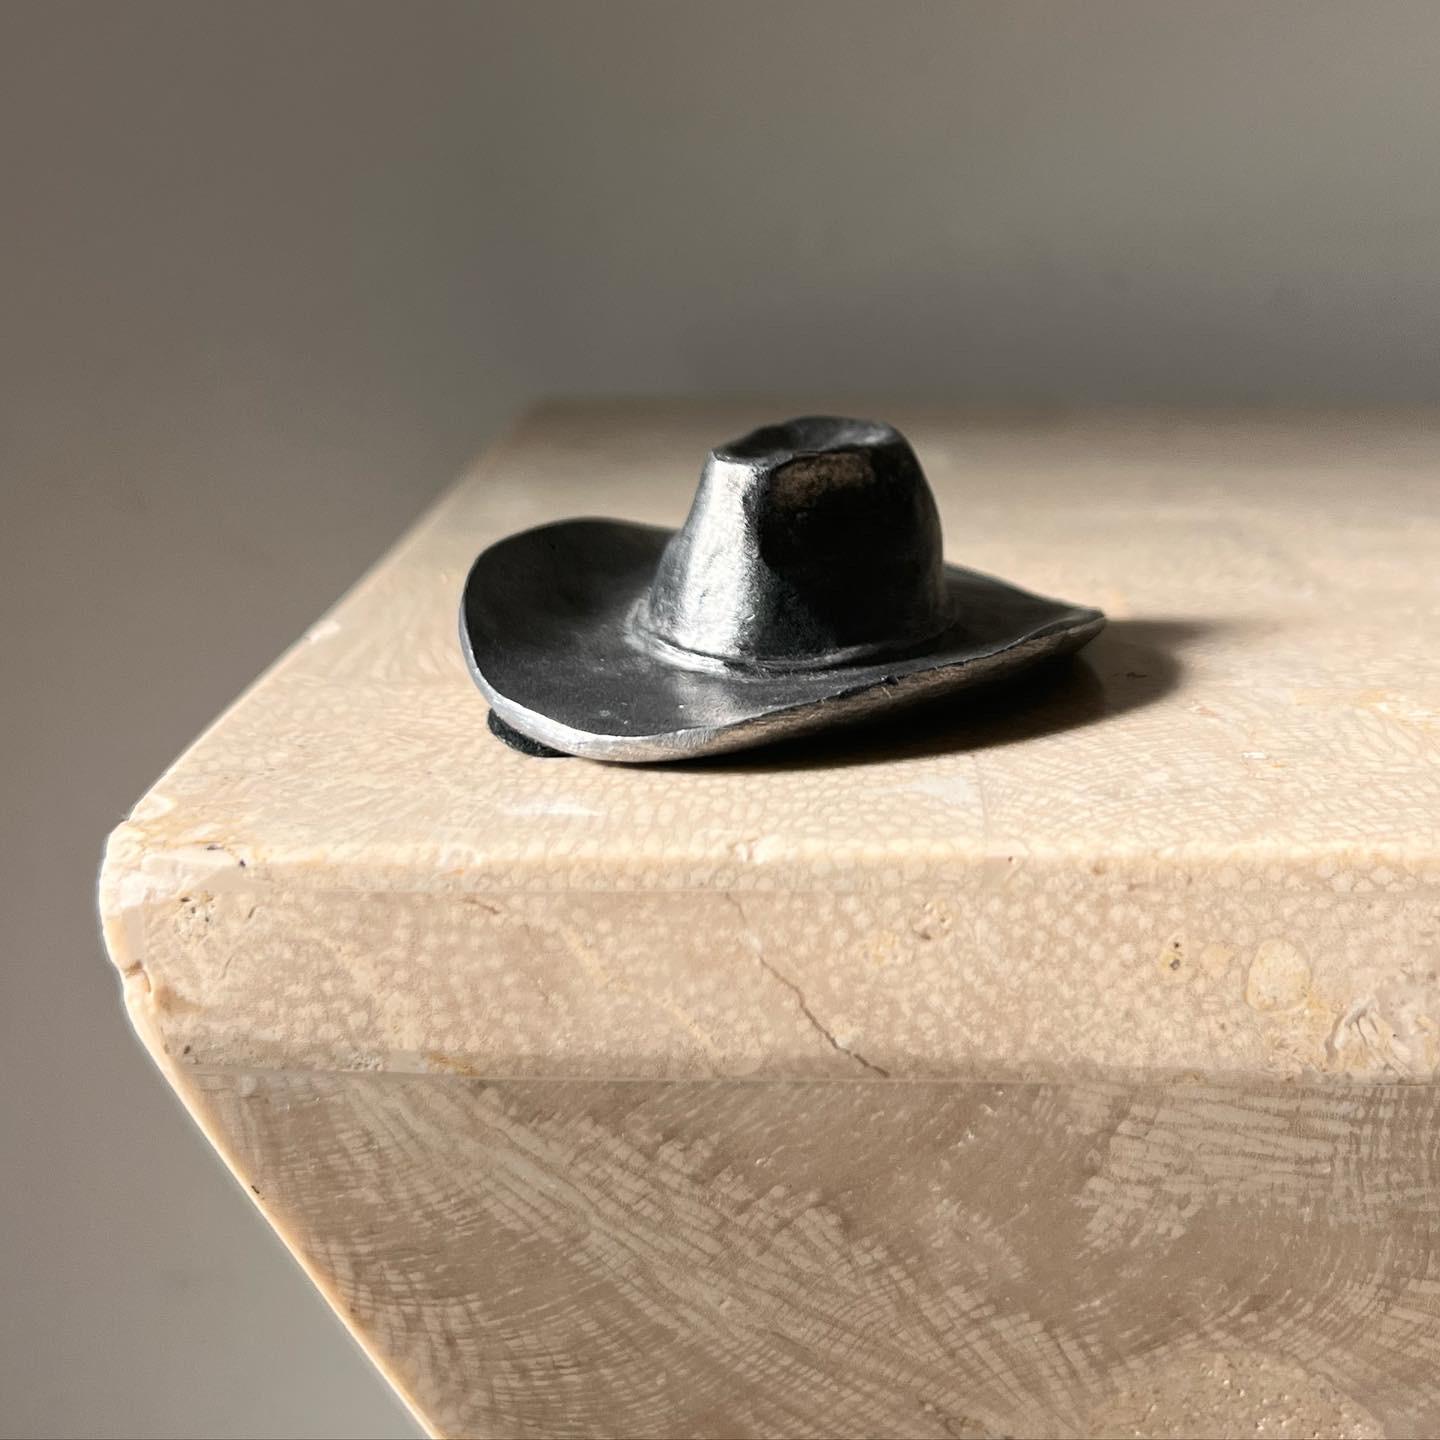 A vintage brutalist forged iron cowboy (or cowgirl) hat objet by Metzke, signed, 1970. Allegedly this is also an ashtray - or a paperweight. To each one’s own. Darling as a gift for your favorite western heartbreaker. Pick up in central west Los